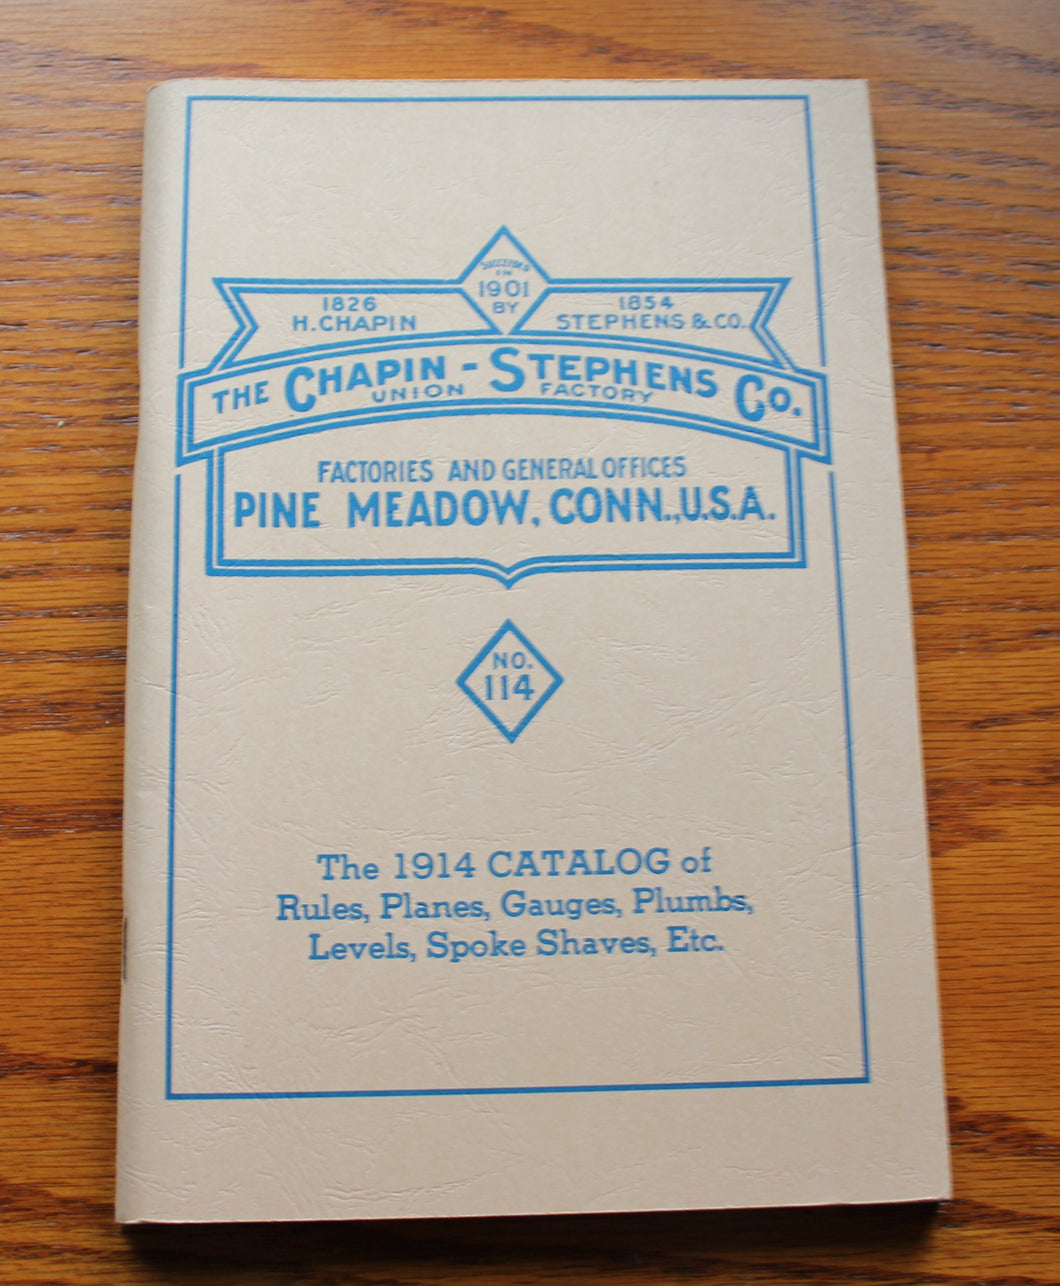 CHAPIN-STEPHENS Co 1914 Catalog of Rules, Planes, Gauges, Plumbs, Etc. Reprint